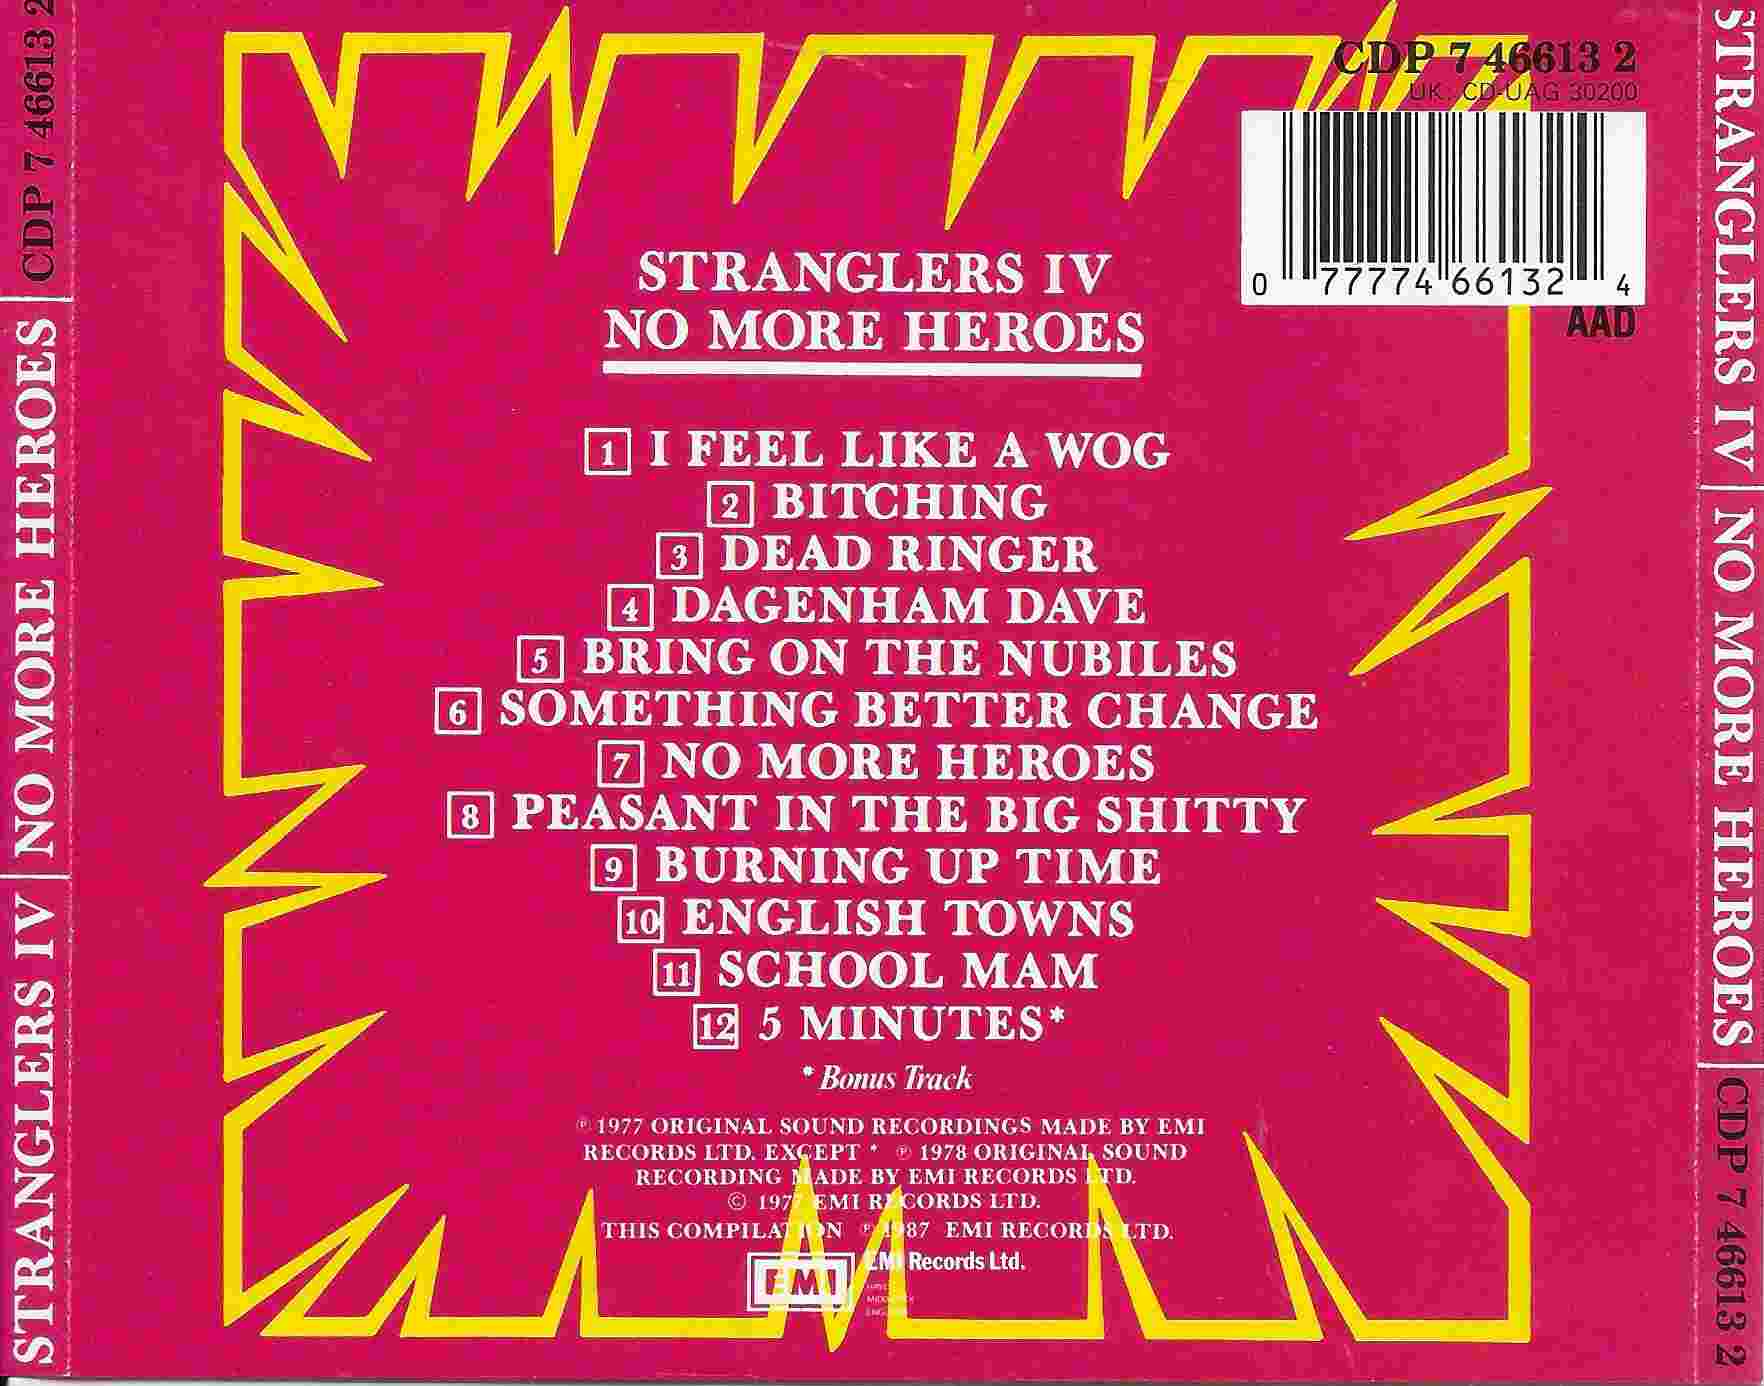 Picture of CDP 746613 2 No more heroes by artist The Stranglers from The Stranglers